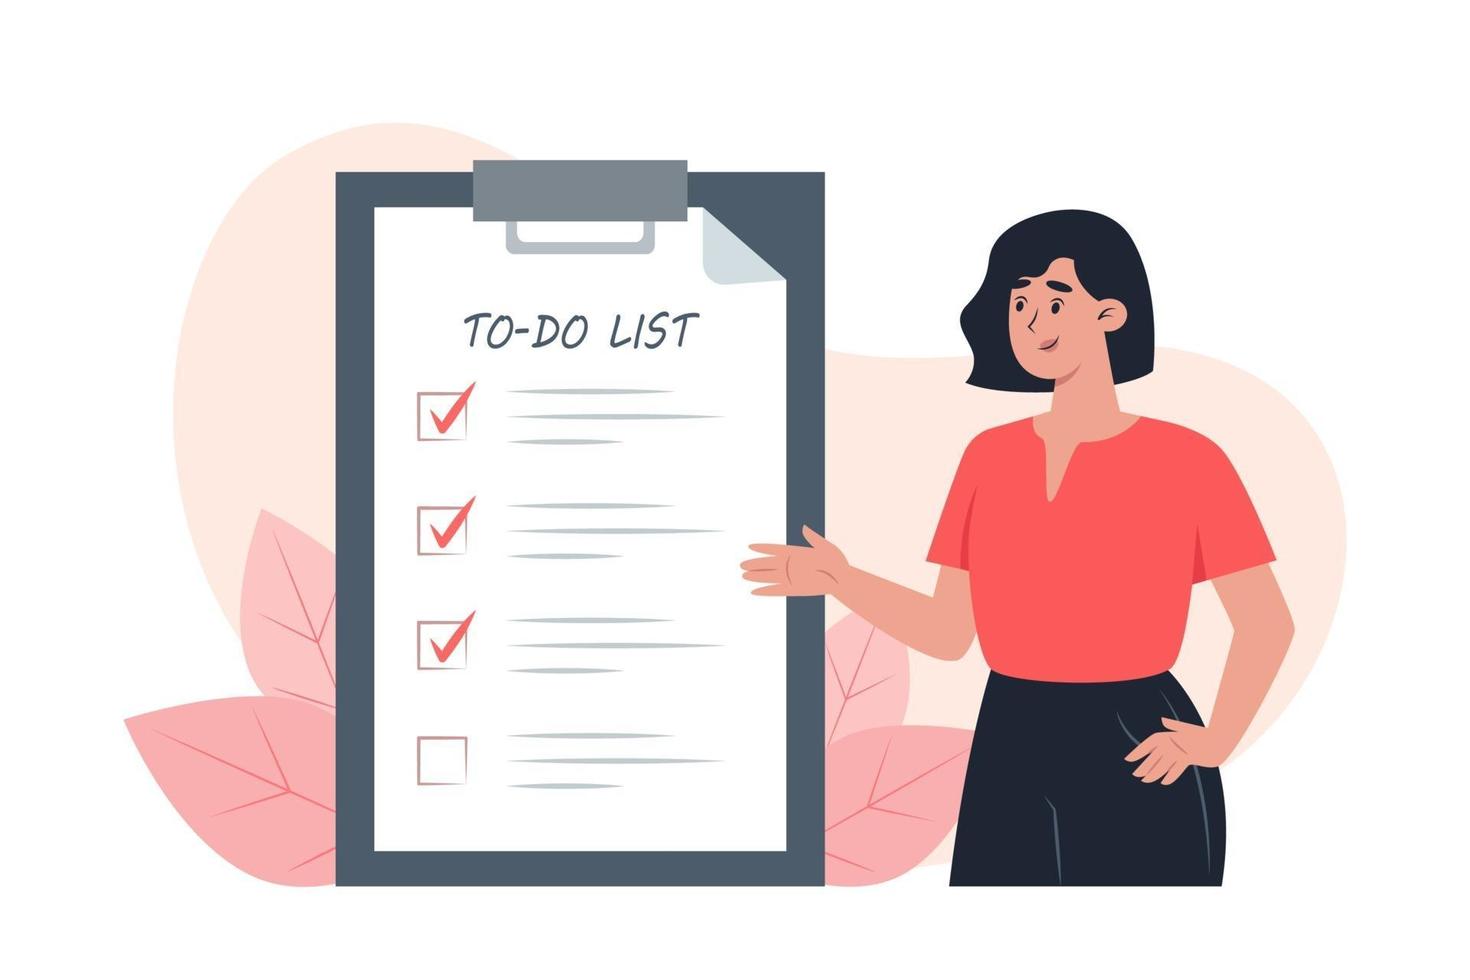 To-do list, young woman puts check marks in front of completed tasks vector